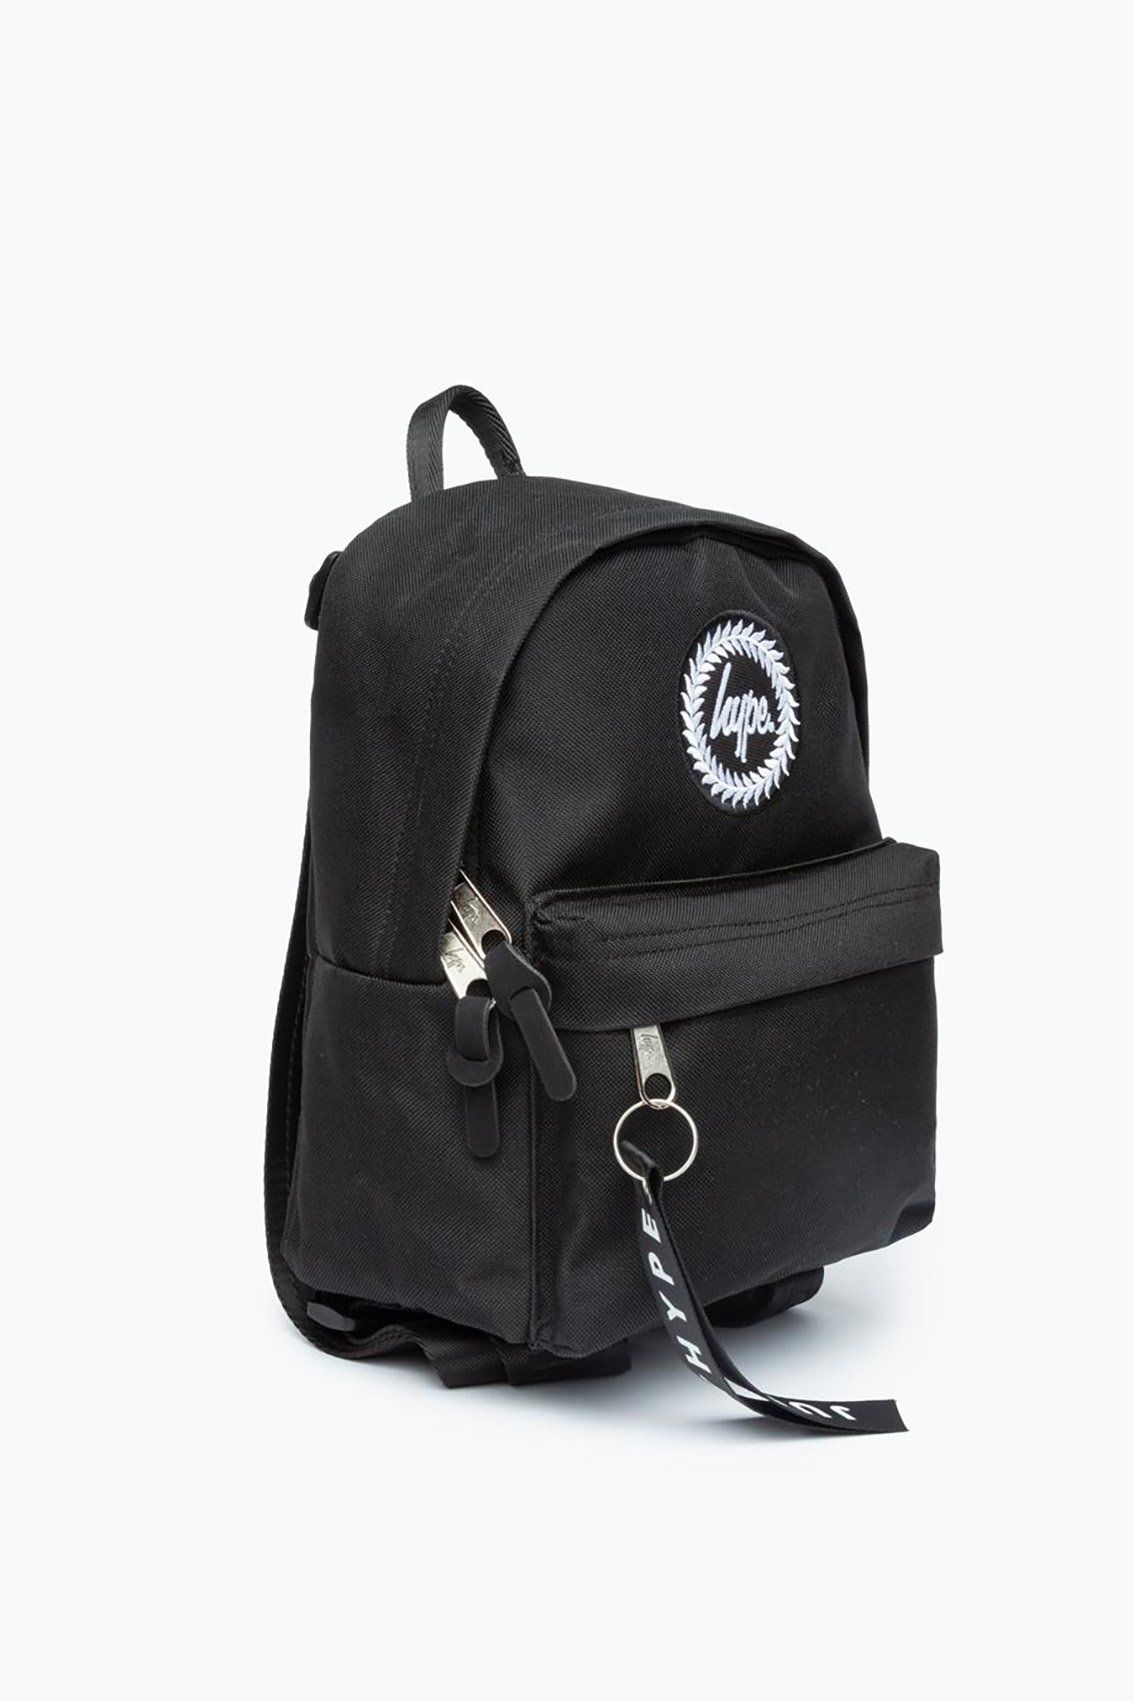 We see you checkin' out the HYPE. black mini backpack. An all over black fabric base, finished with a monochrome embossed puller tag and the iconic HYPE. crest badge. This is a mini version of our standard backpack shape. Perfect for storing your essential items while you're on the go. Wipe clean only.